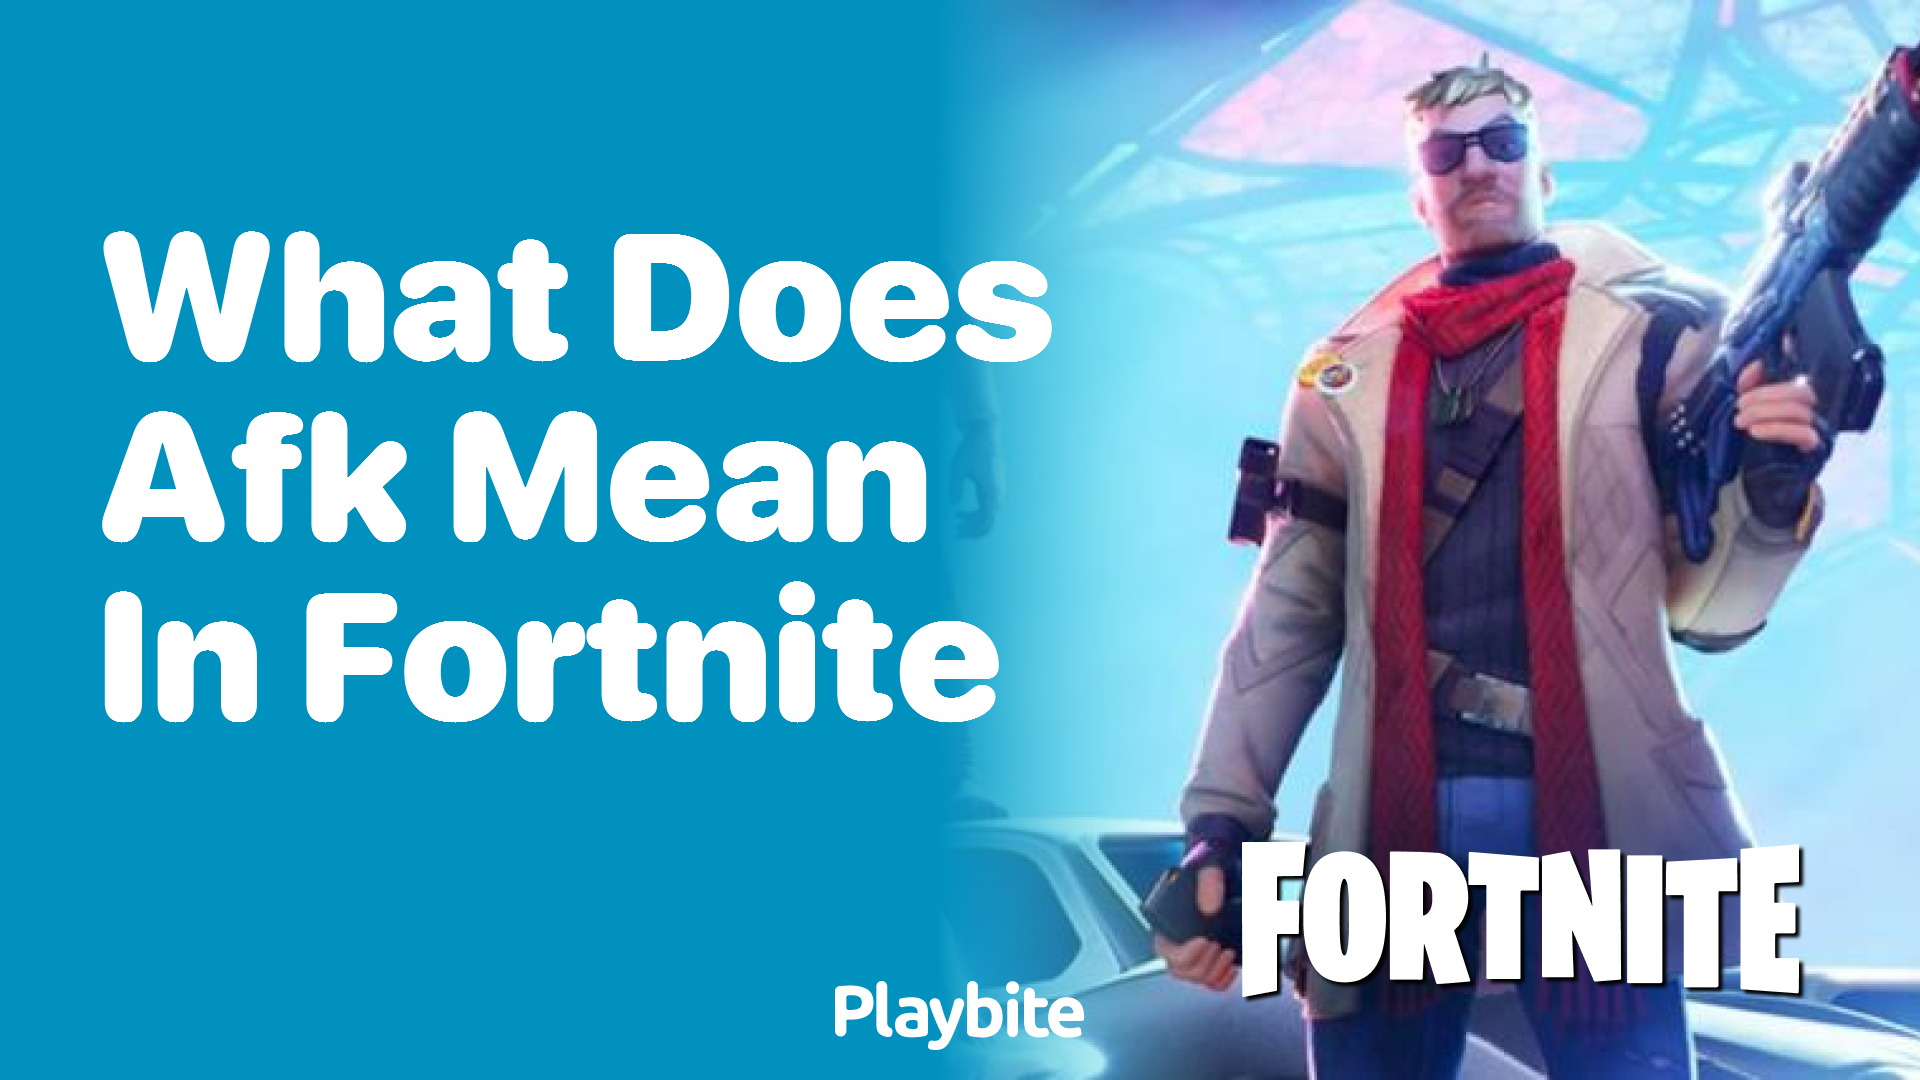 What Does AFK Mean in Fortnite? Unpacking the Gamer Lingo